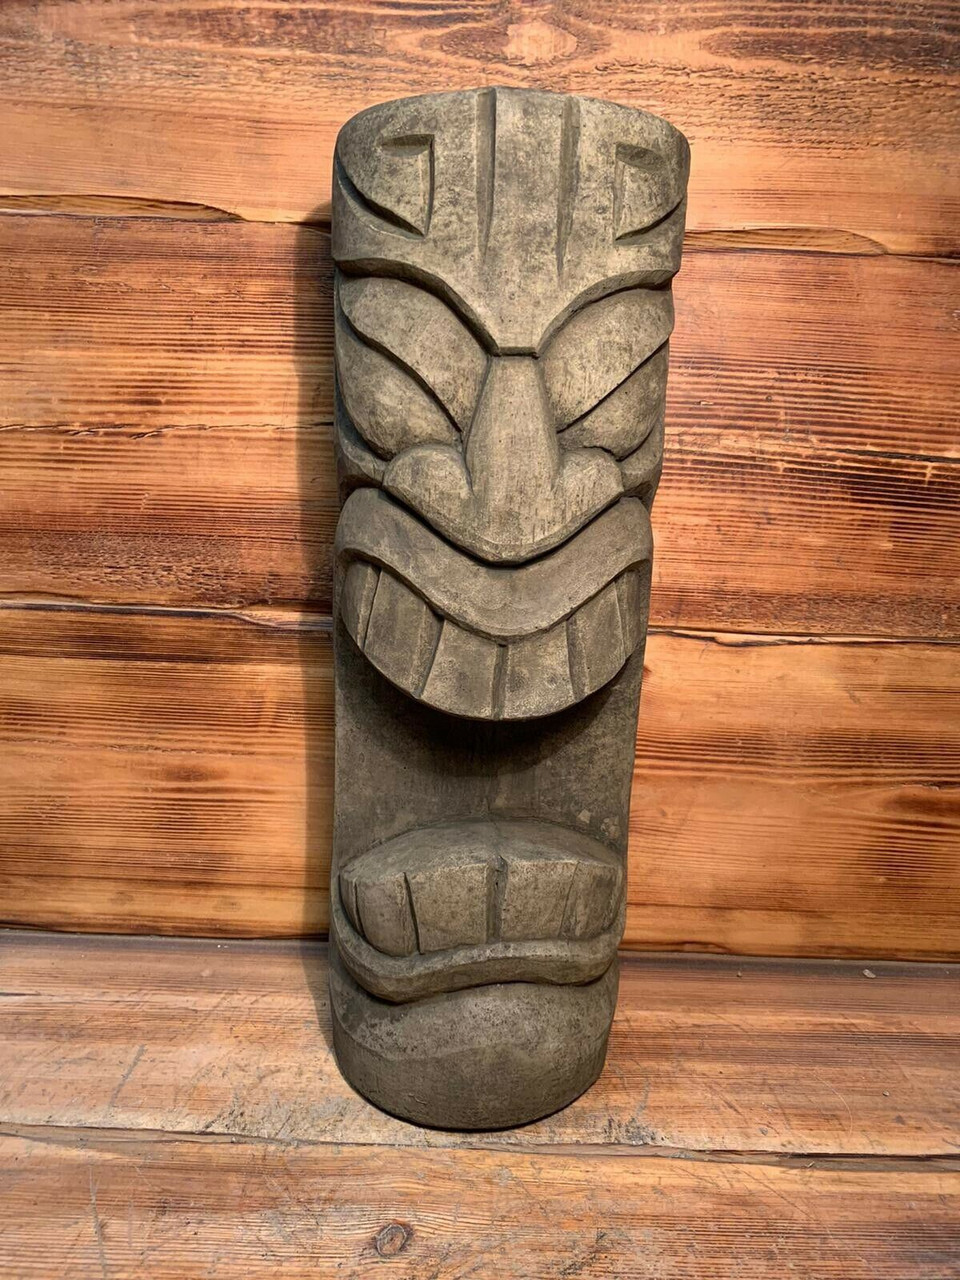 STONE GARDEN LARGE TOTEM POLE EASTER ISLAND AFRICAN HEAD TIKI STATUE ORNAMENT